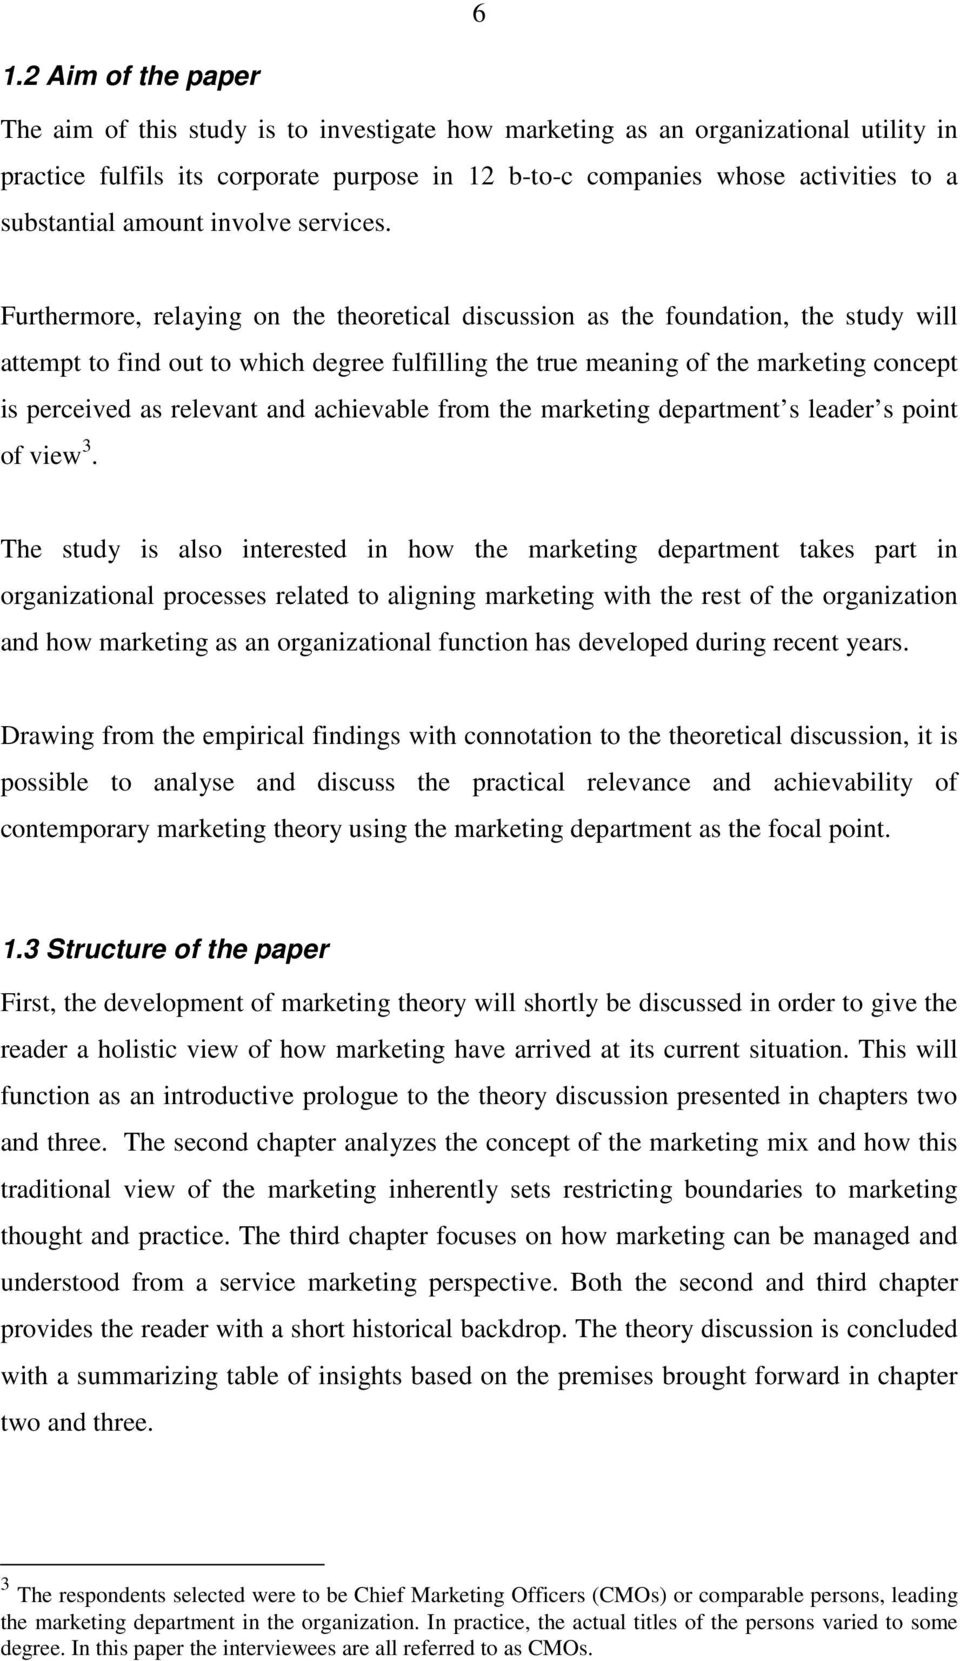 Furthermore, relaying on the theoretical discussion as the foundation, the study will attempt to find out to which degree fulfilling the true meaning of the marketing concept is perceived as relevant